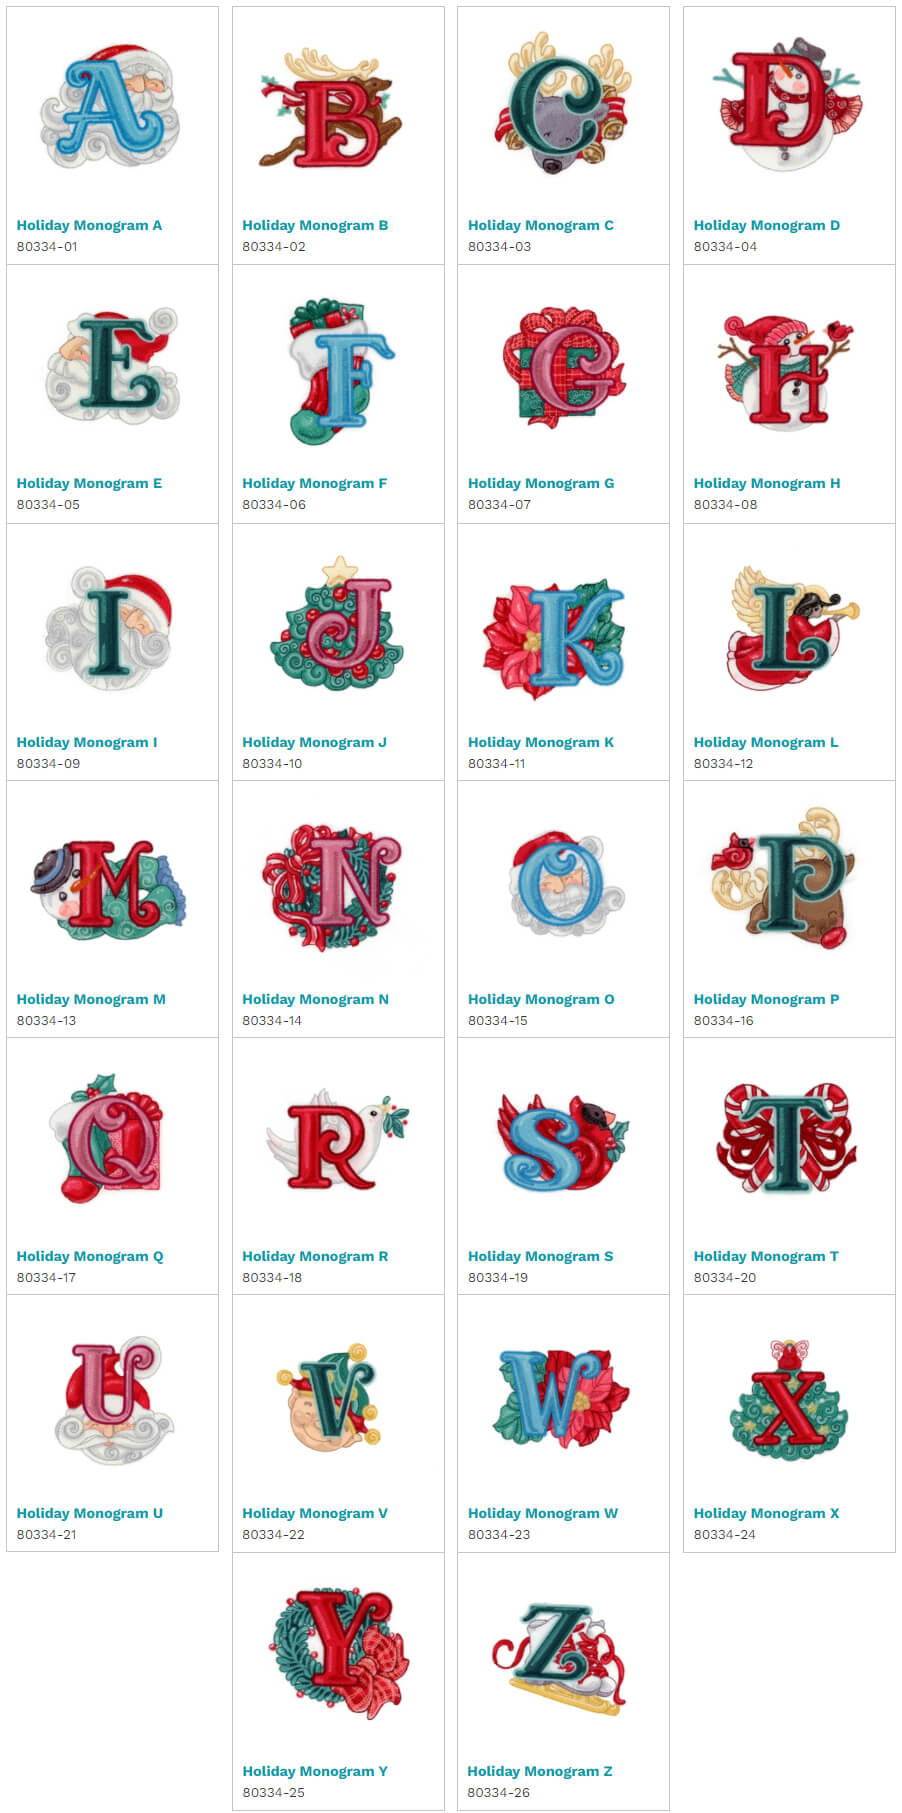 OESD's #80334 Holiday Monograms Embroidery Design Collection available at Nancy Zieman Productions at ShopNZP.com